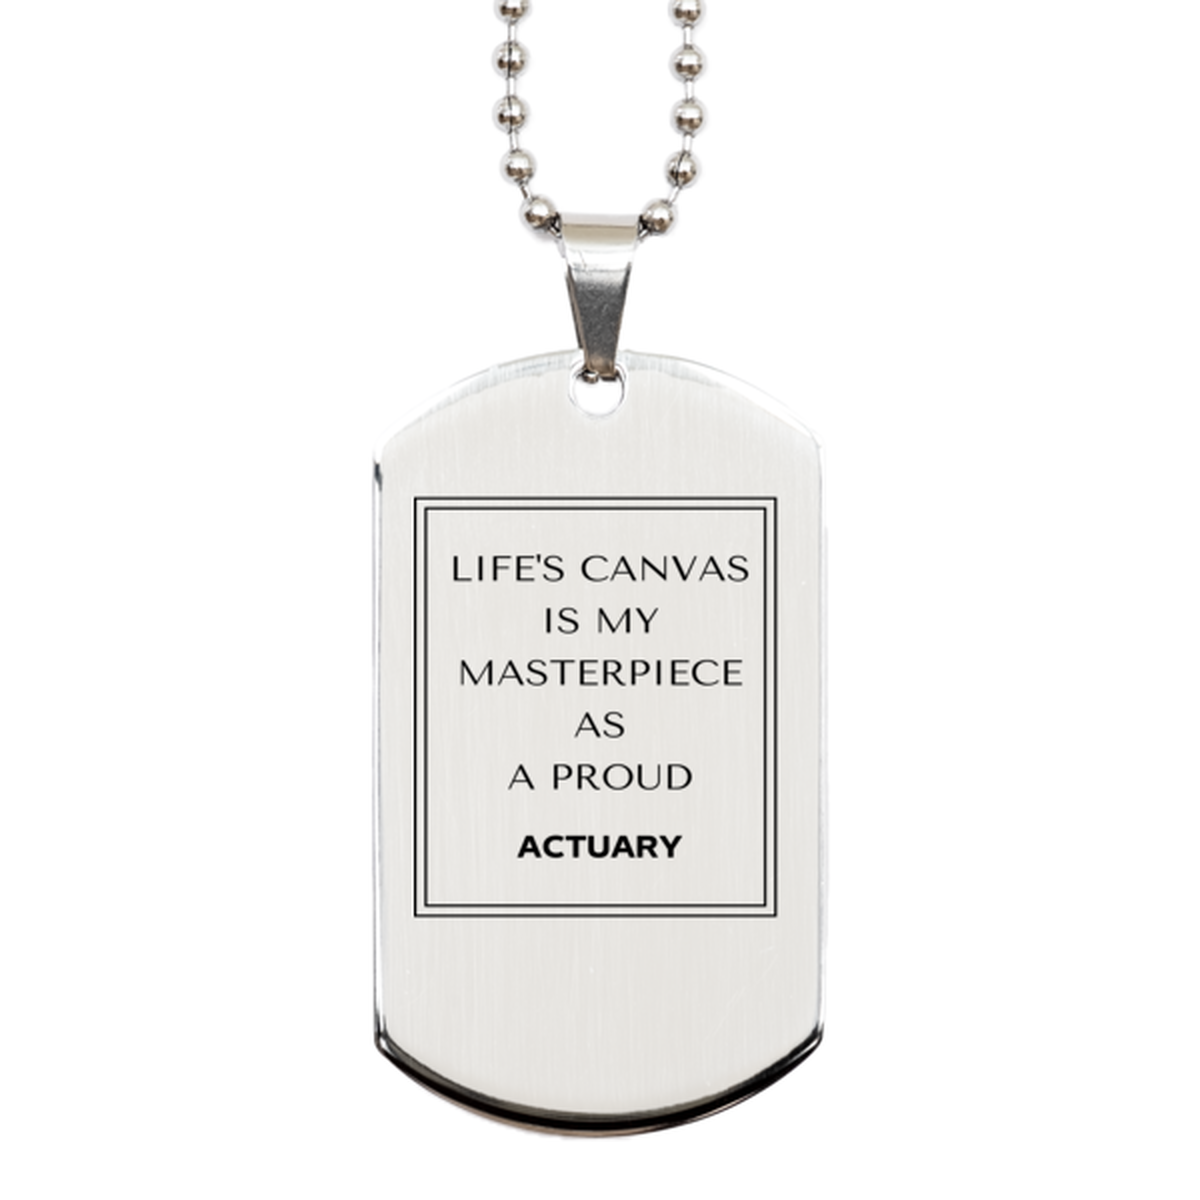 Proud Actuary Gifts, Life's canvas is my masterpiece, Epic Birthday Christmas Unique Silver Dog Tag For Actuary, Coworkers, Men, Women, Friends